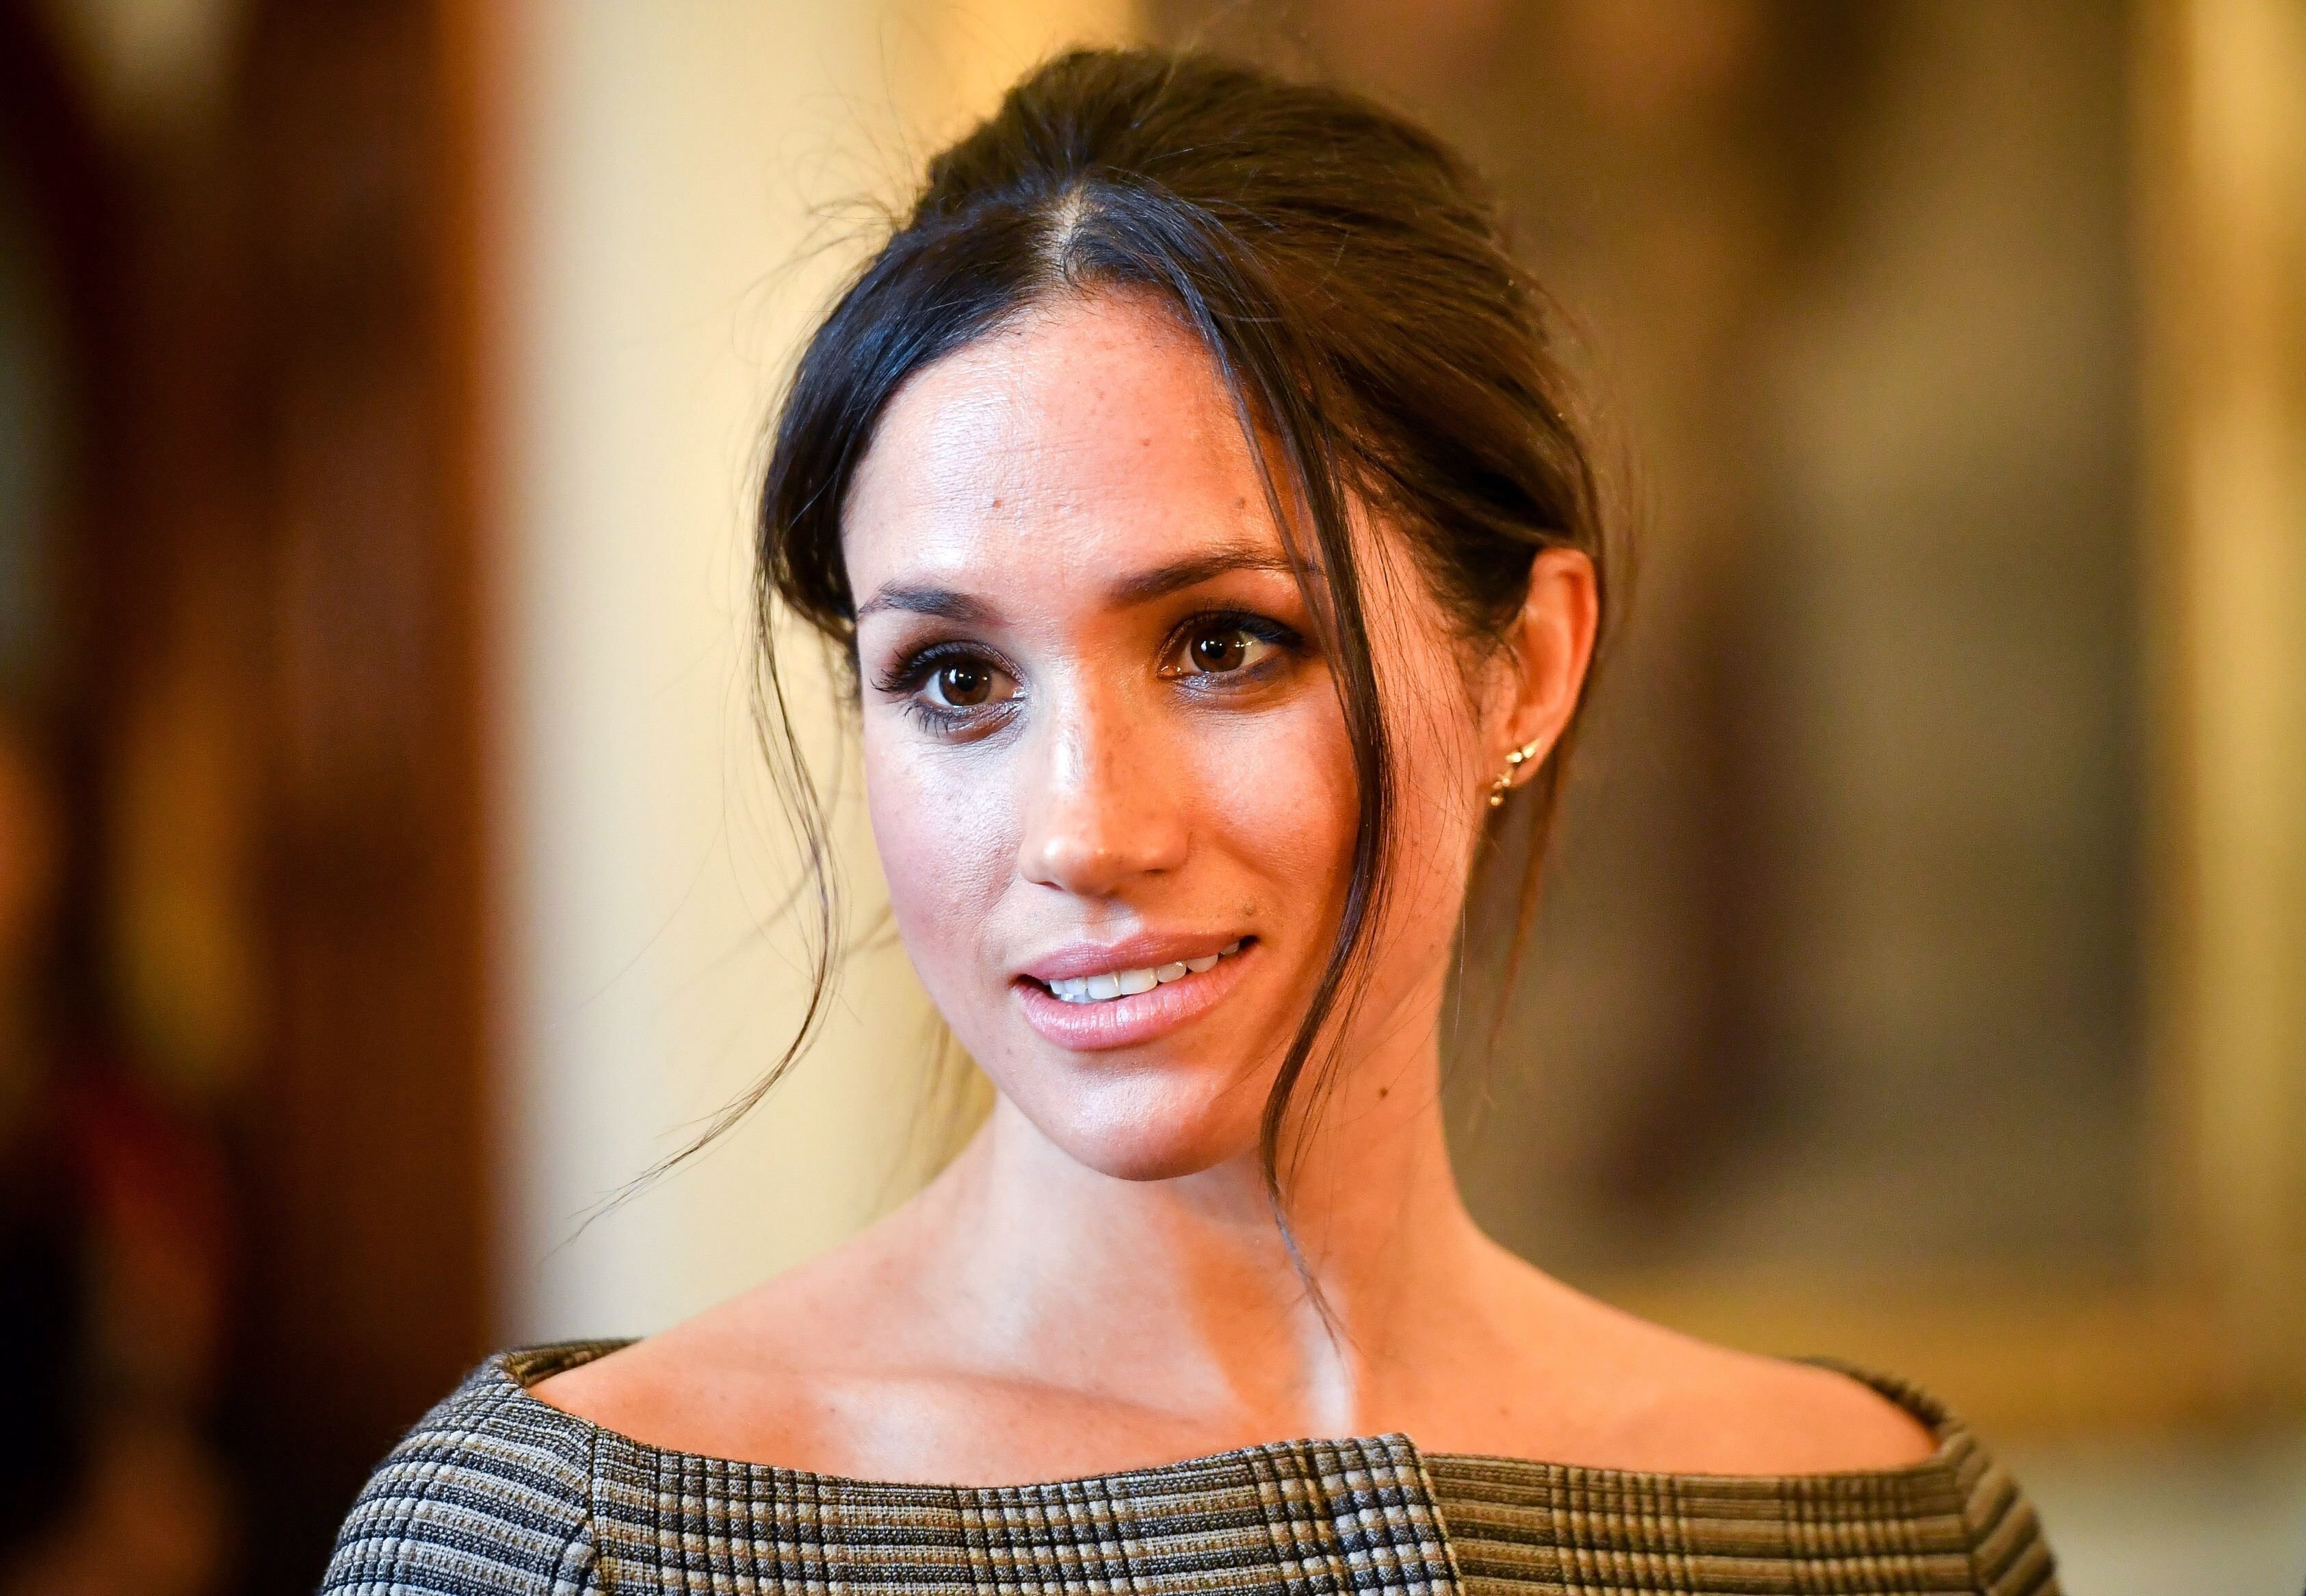 Meghan Markle during a royal engagement in January 2018. | Photo: Getty Images